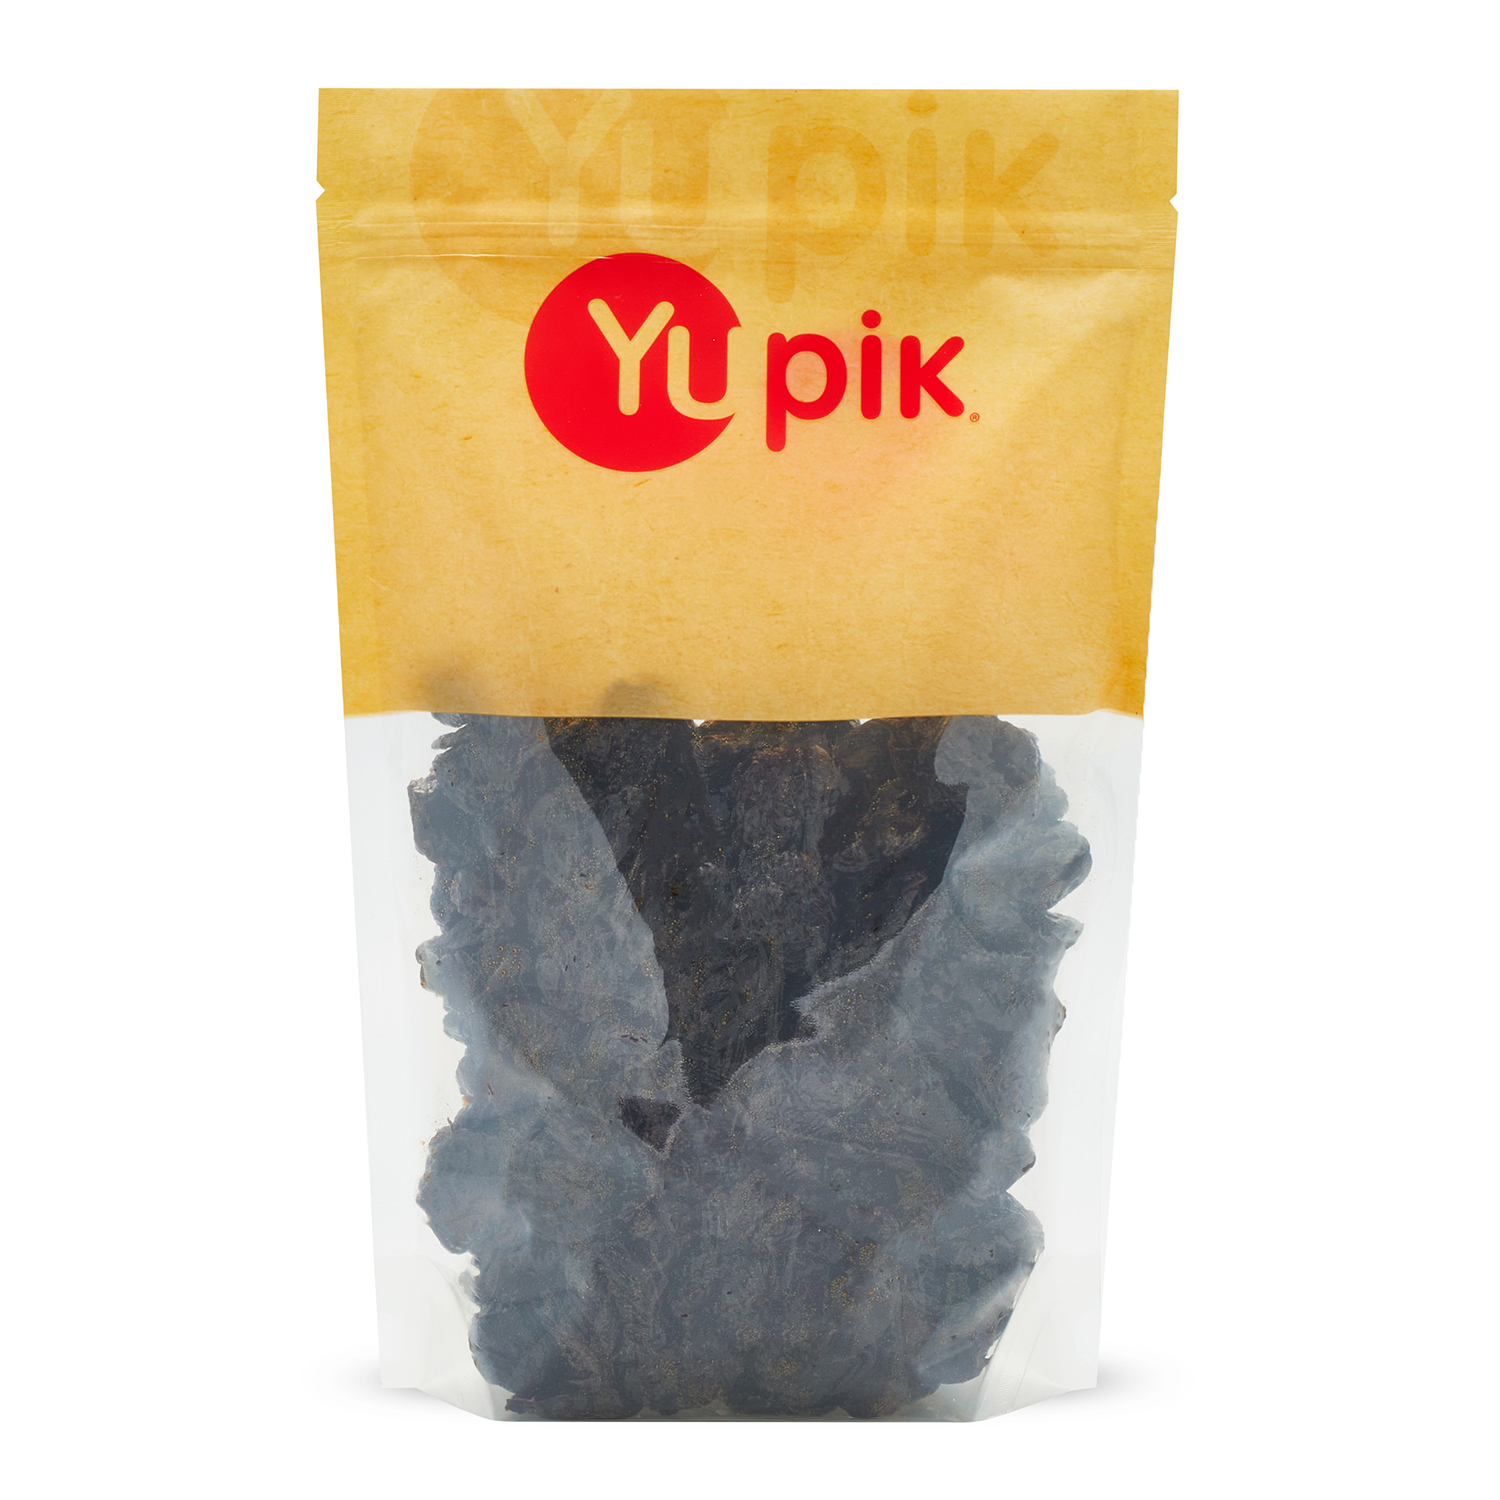 Prunes, Potassium sorbate.  MAY CONTAIN OCCASIONALLY PITS OR PIT FRAGMENTS.